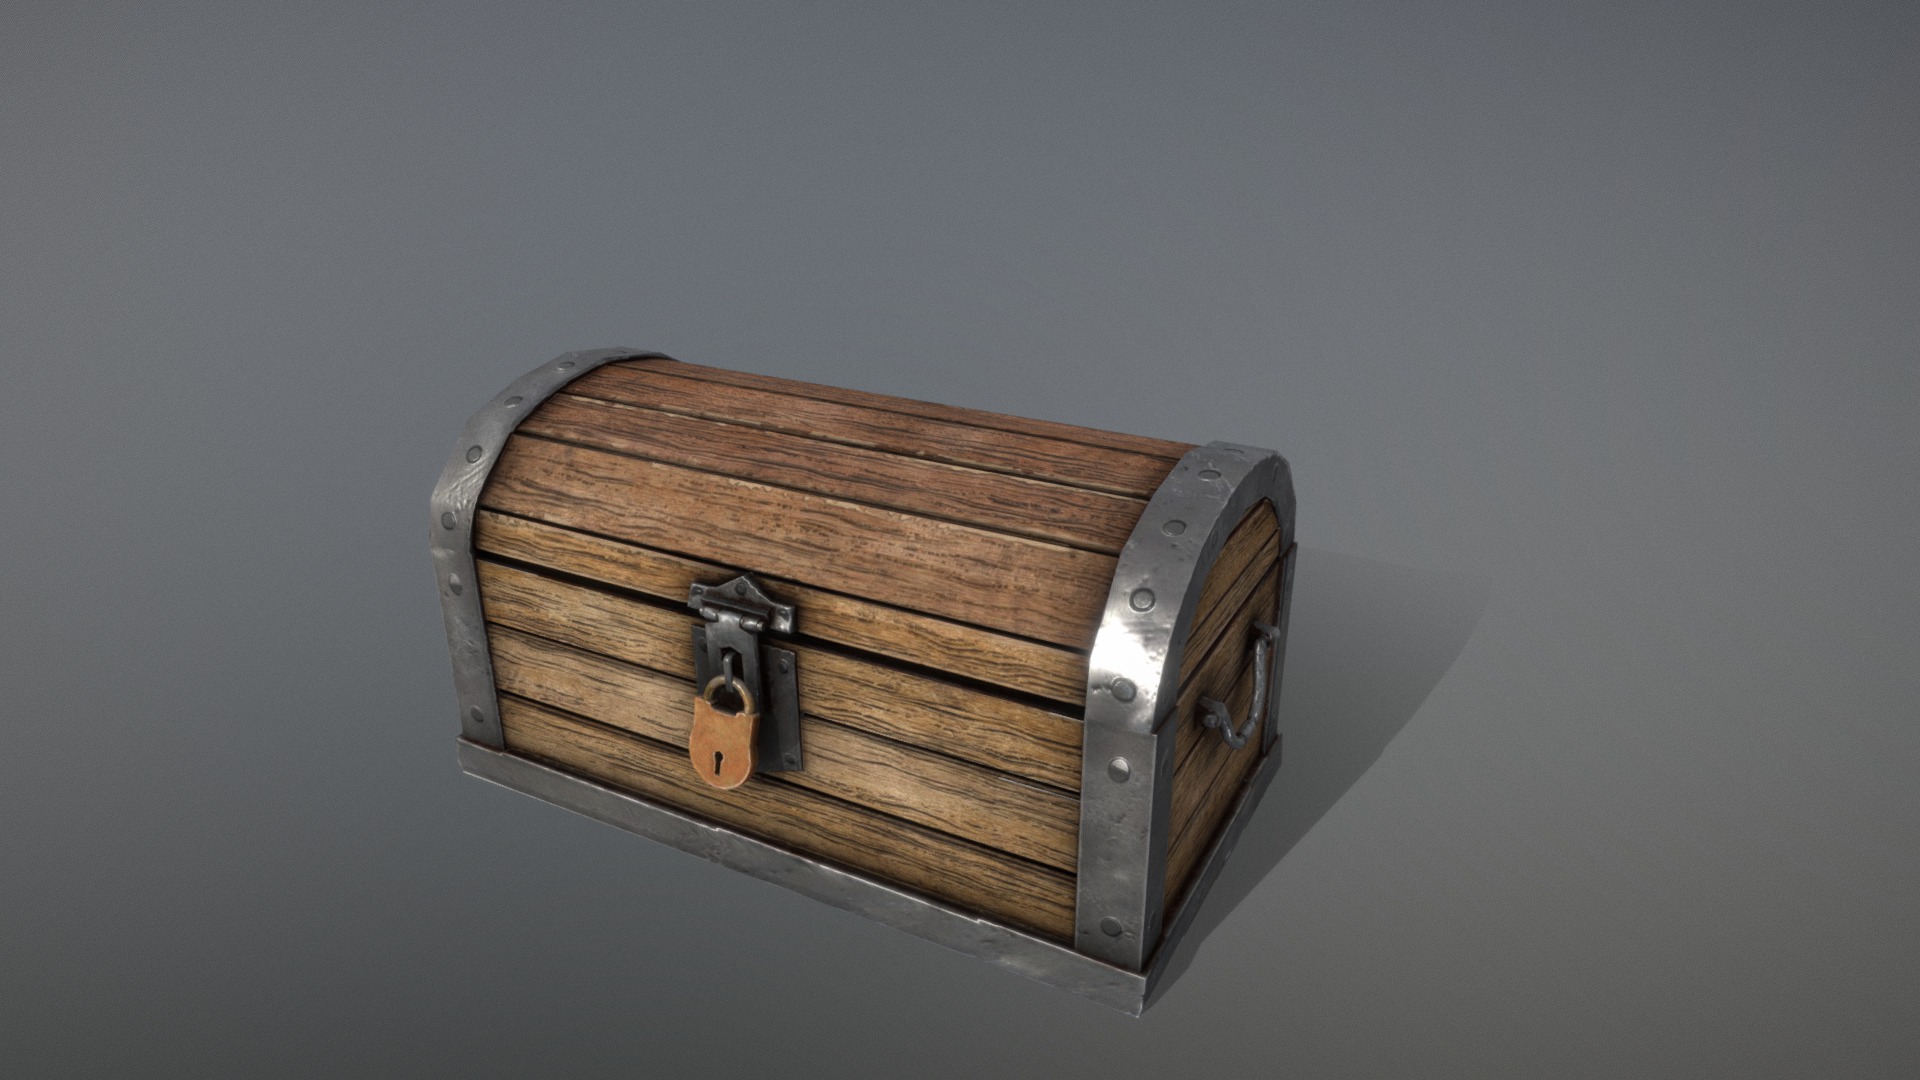 3D model Low Poly Wood Chest – Animated - This is a 3D model of the Low Poly Wood Chest - Animated. The 3D model is about a wooden box with a metal handle.